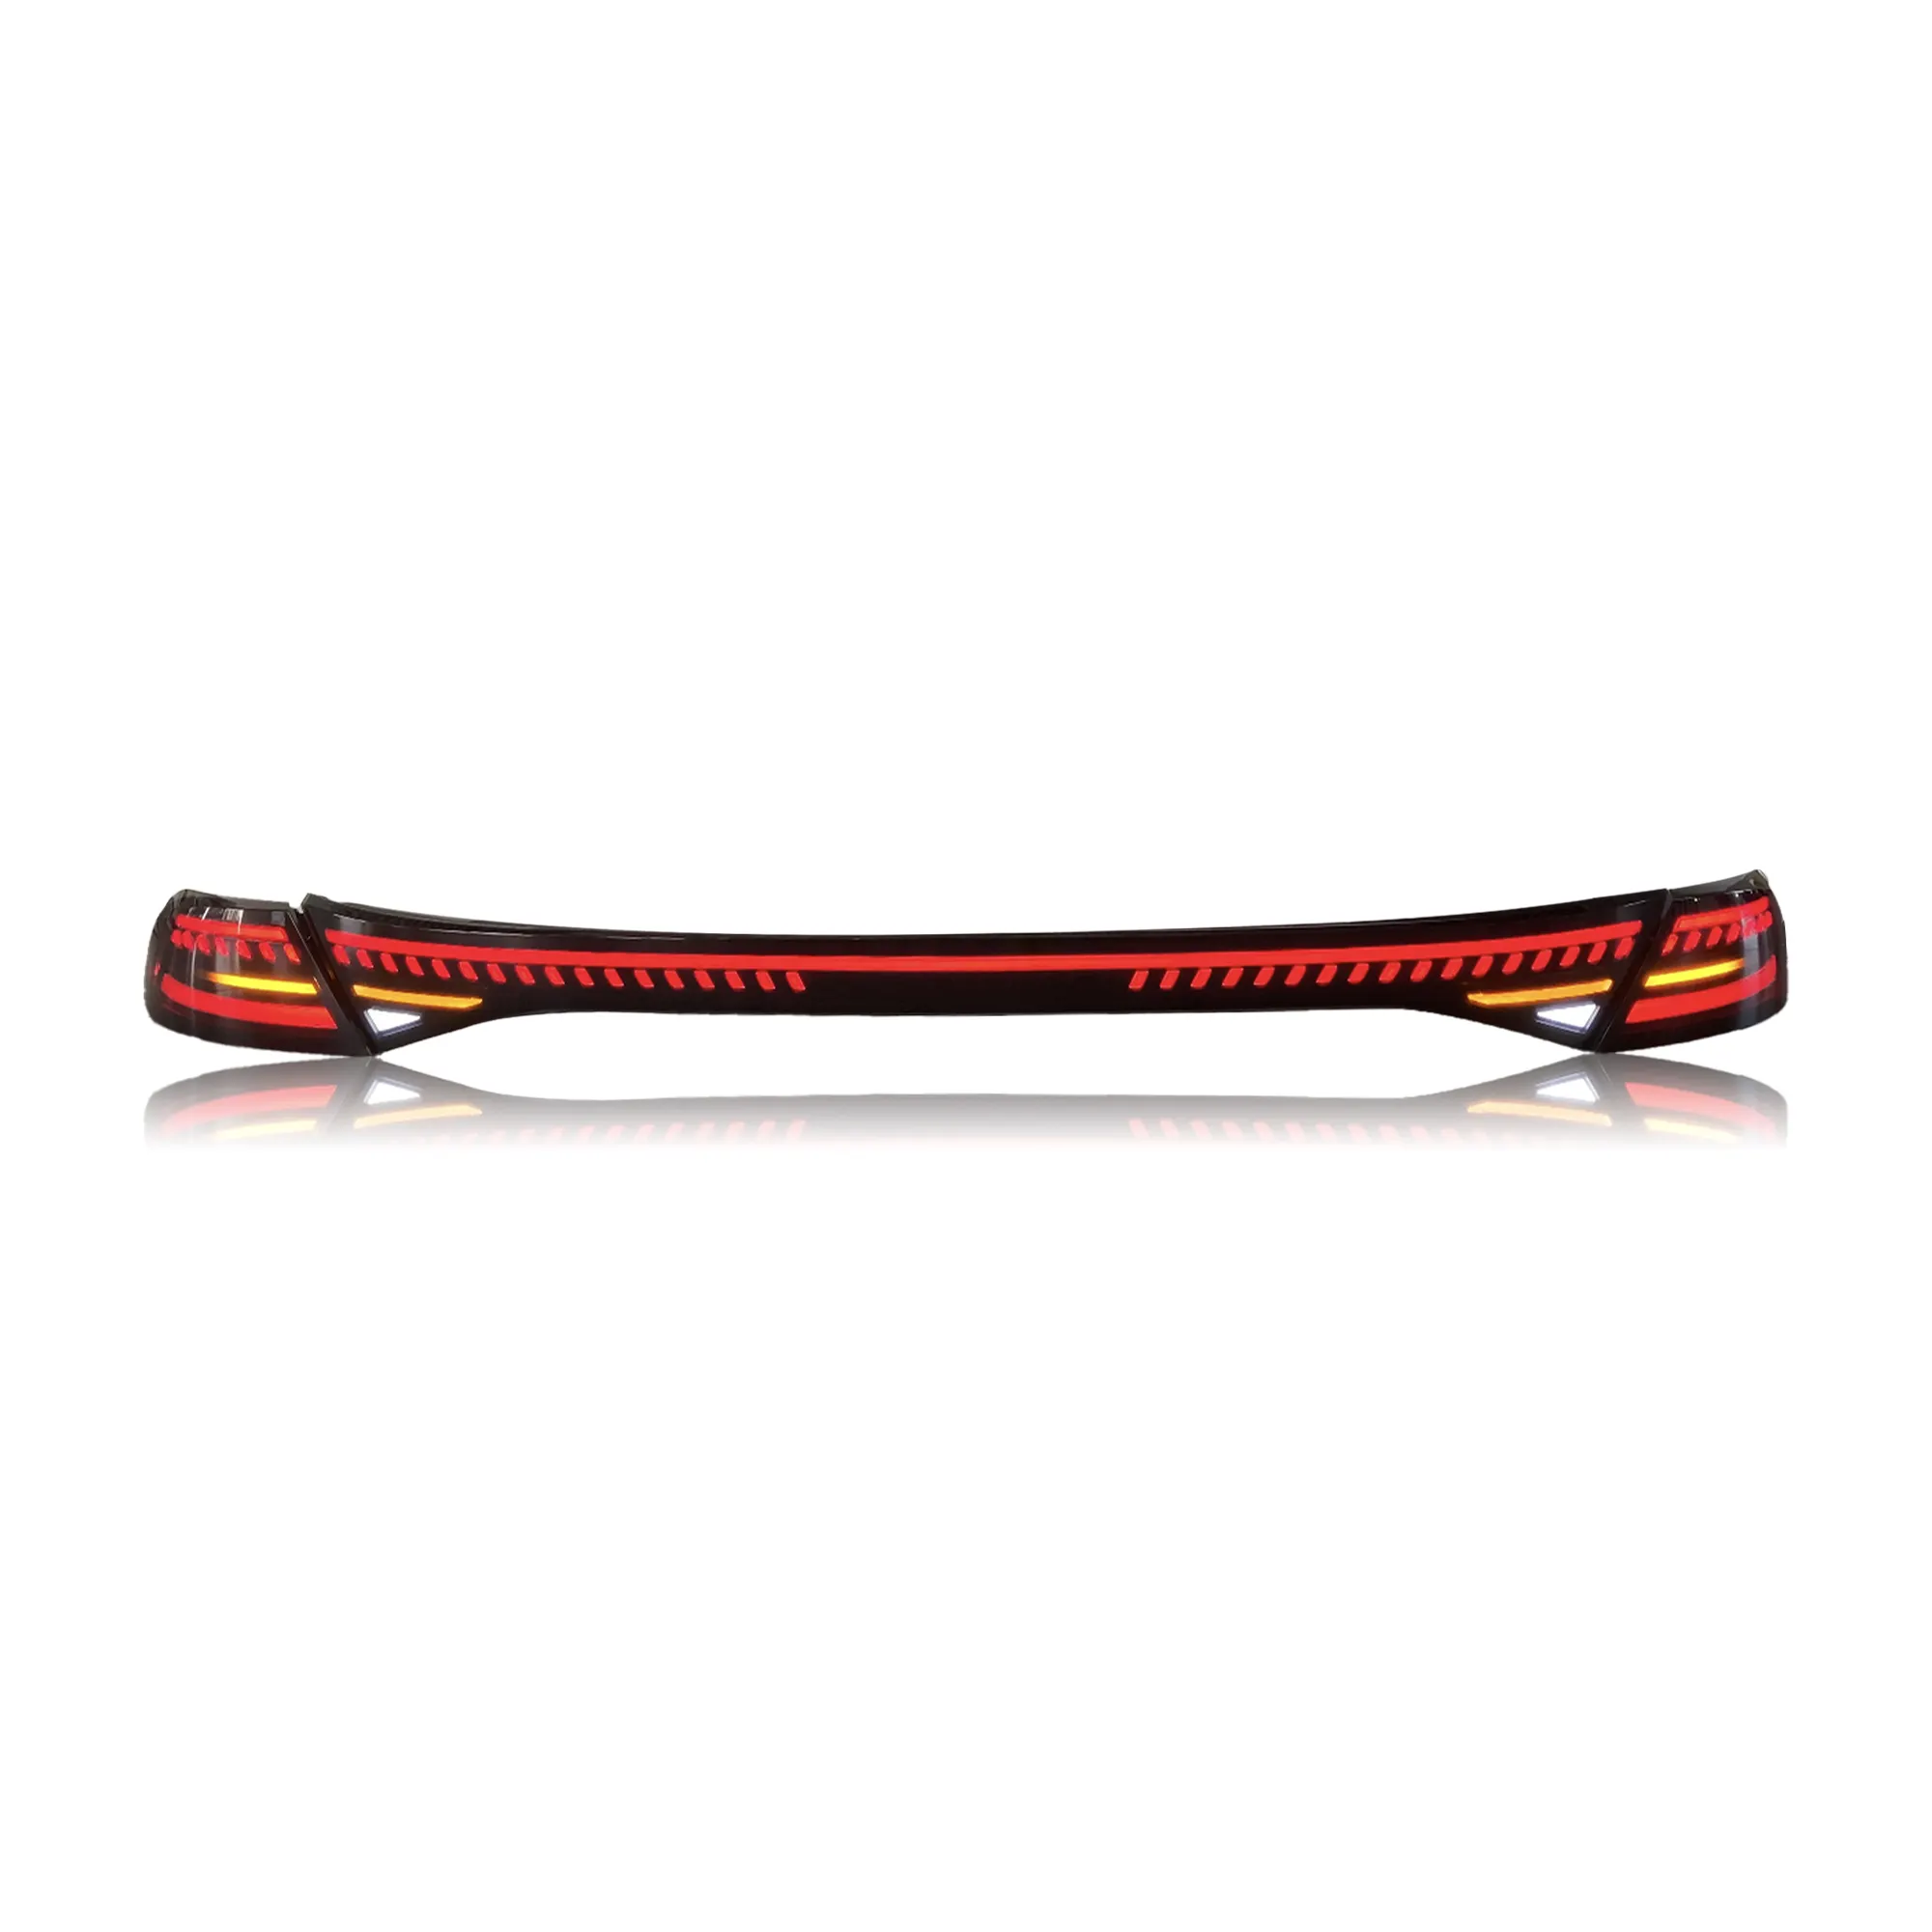 New Design For Honda 11th Accord Trunk Lamp with start mode red dynamic Spoiler Bumper LED Tail Light Auto Parts